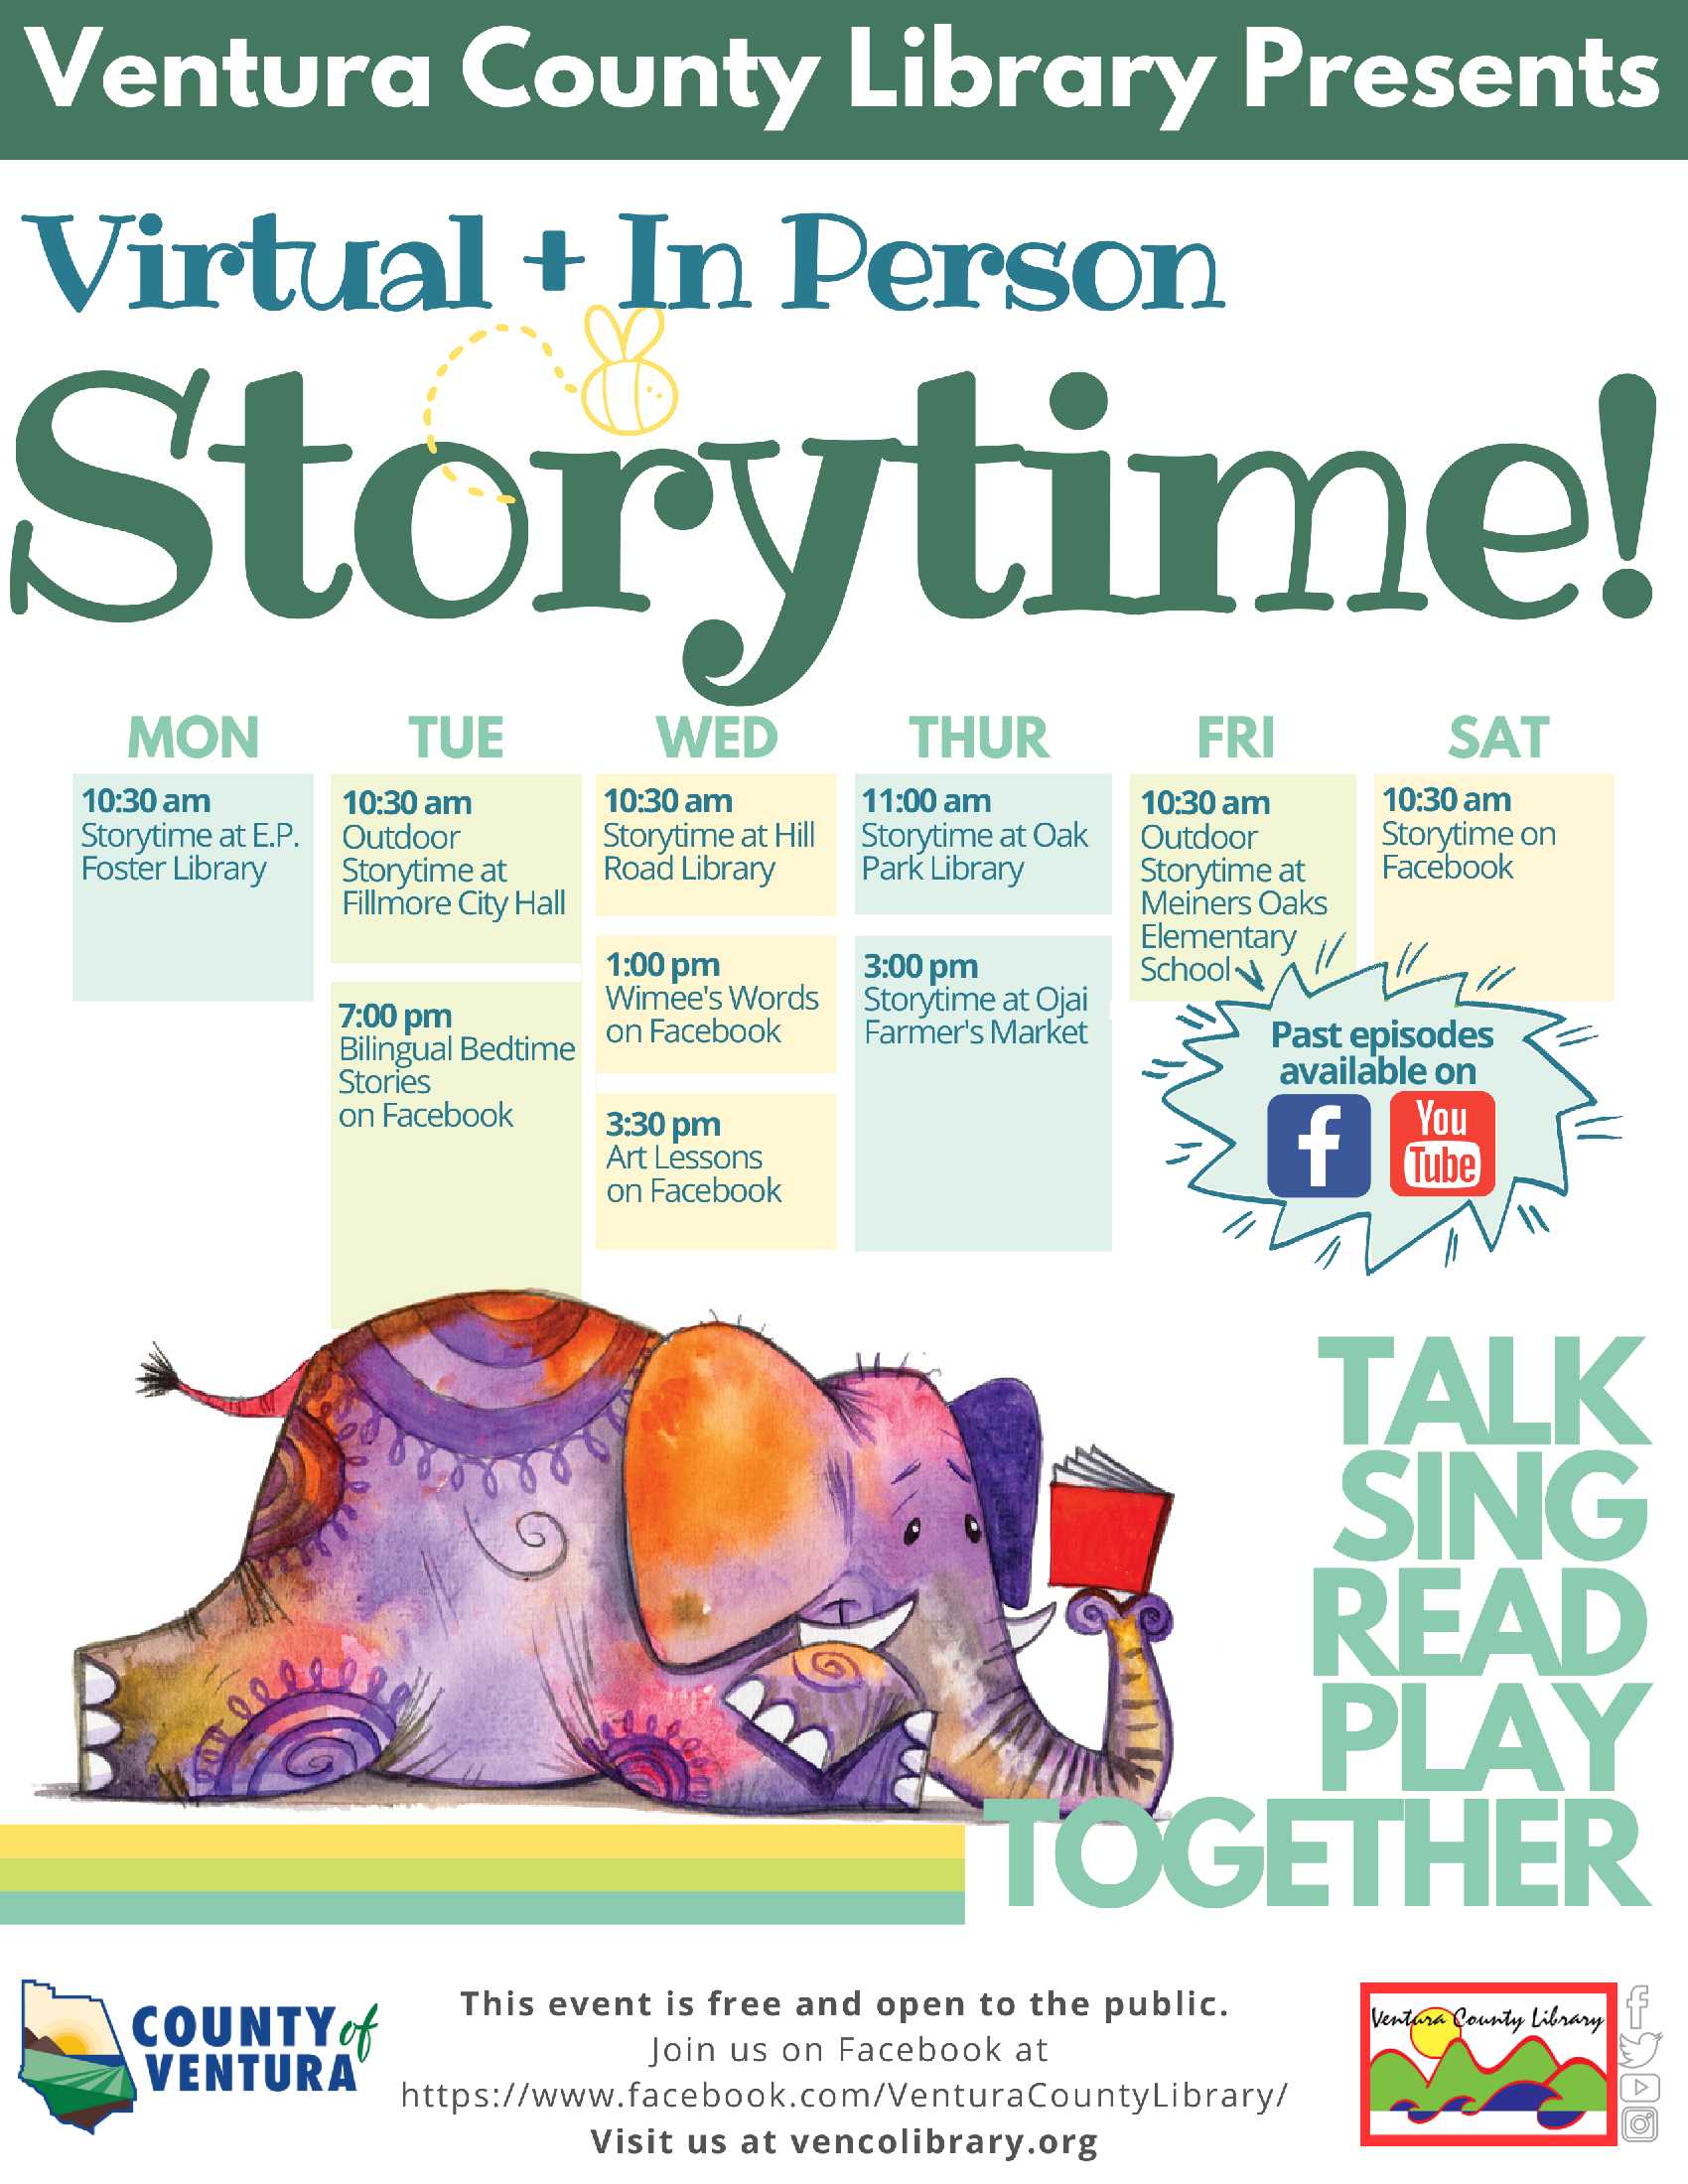 Ventura County Library Presents Virtual &amp; In Person Storytime! This event is free and open to the public. Join us on Facebook at facebook.com/VenturaCountyLibrary. Visit us at vencolibrary.org.